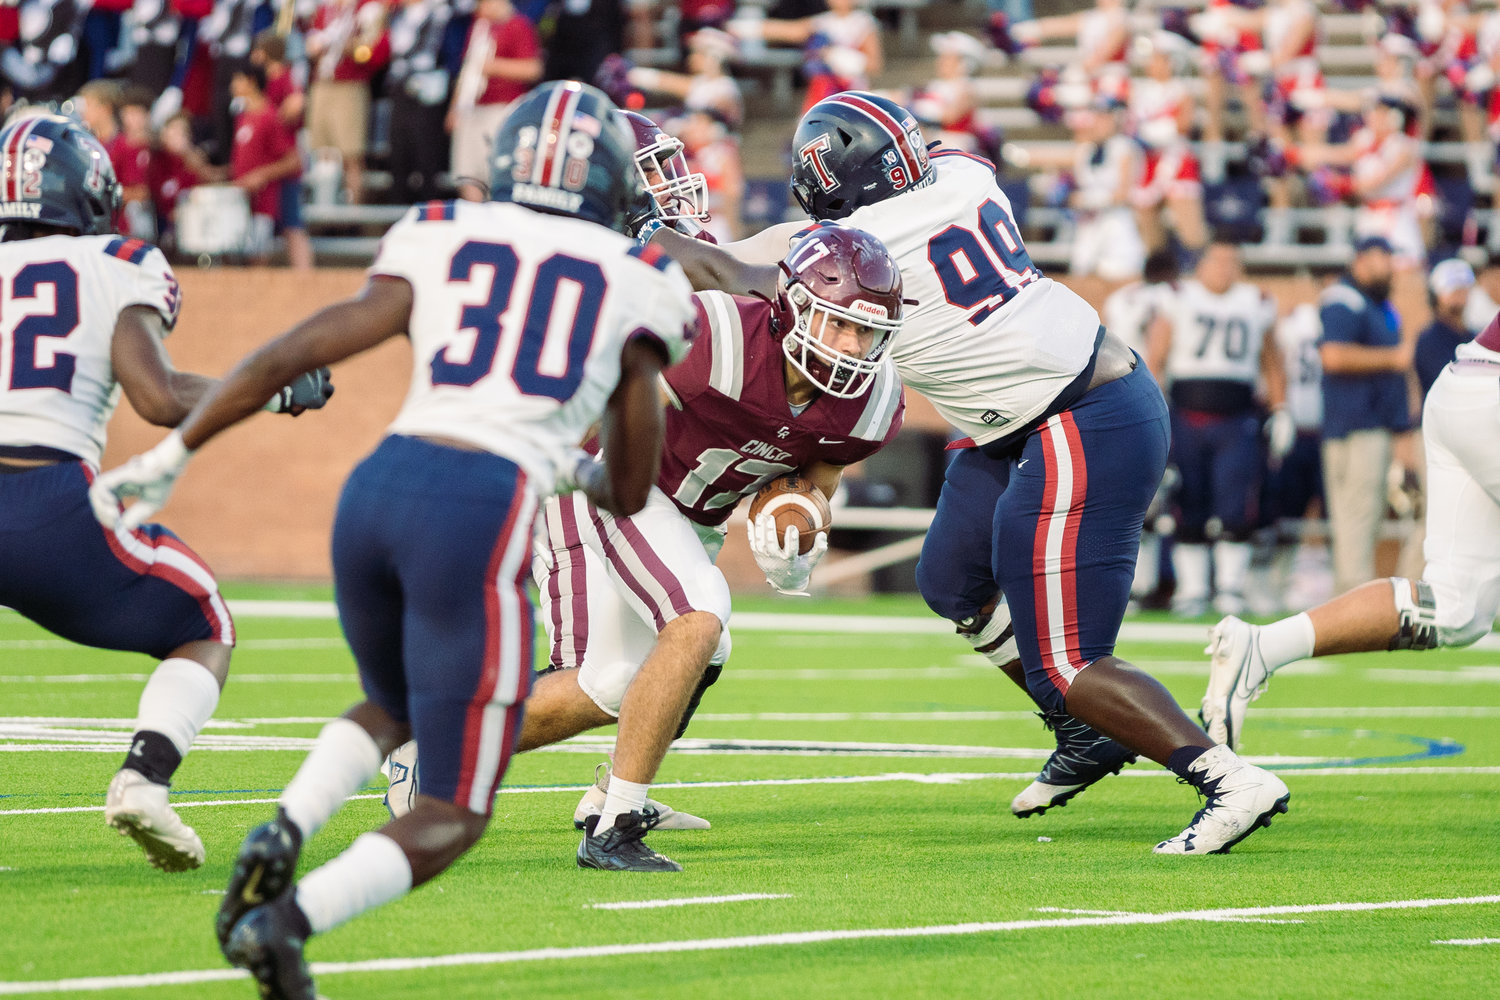 Cinco Ranch’s Eric Eckstrom runs the ball during Friday’s game between Cinco Ranch and Tompkins at Rhodes Stadium.